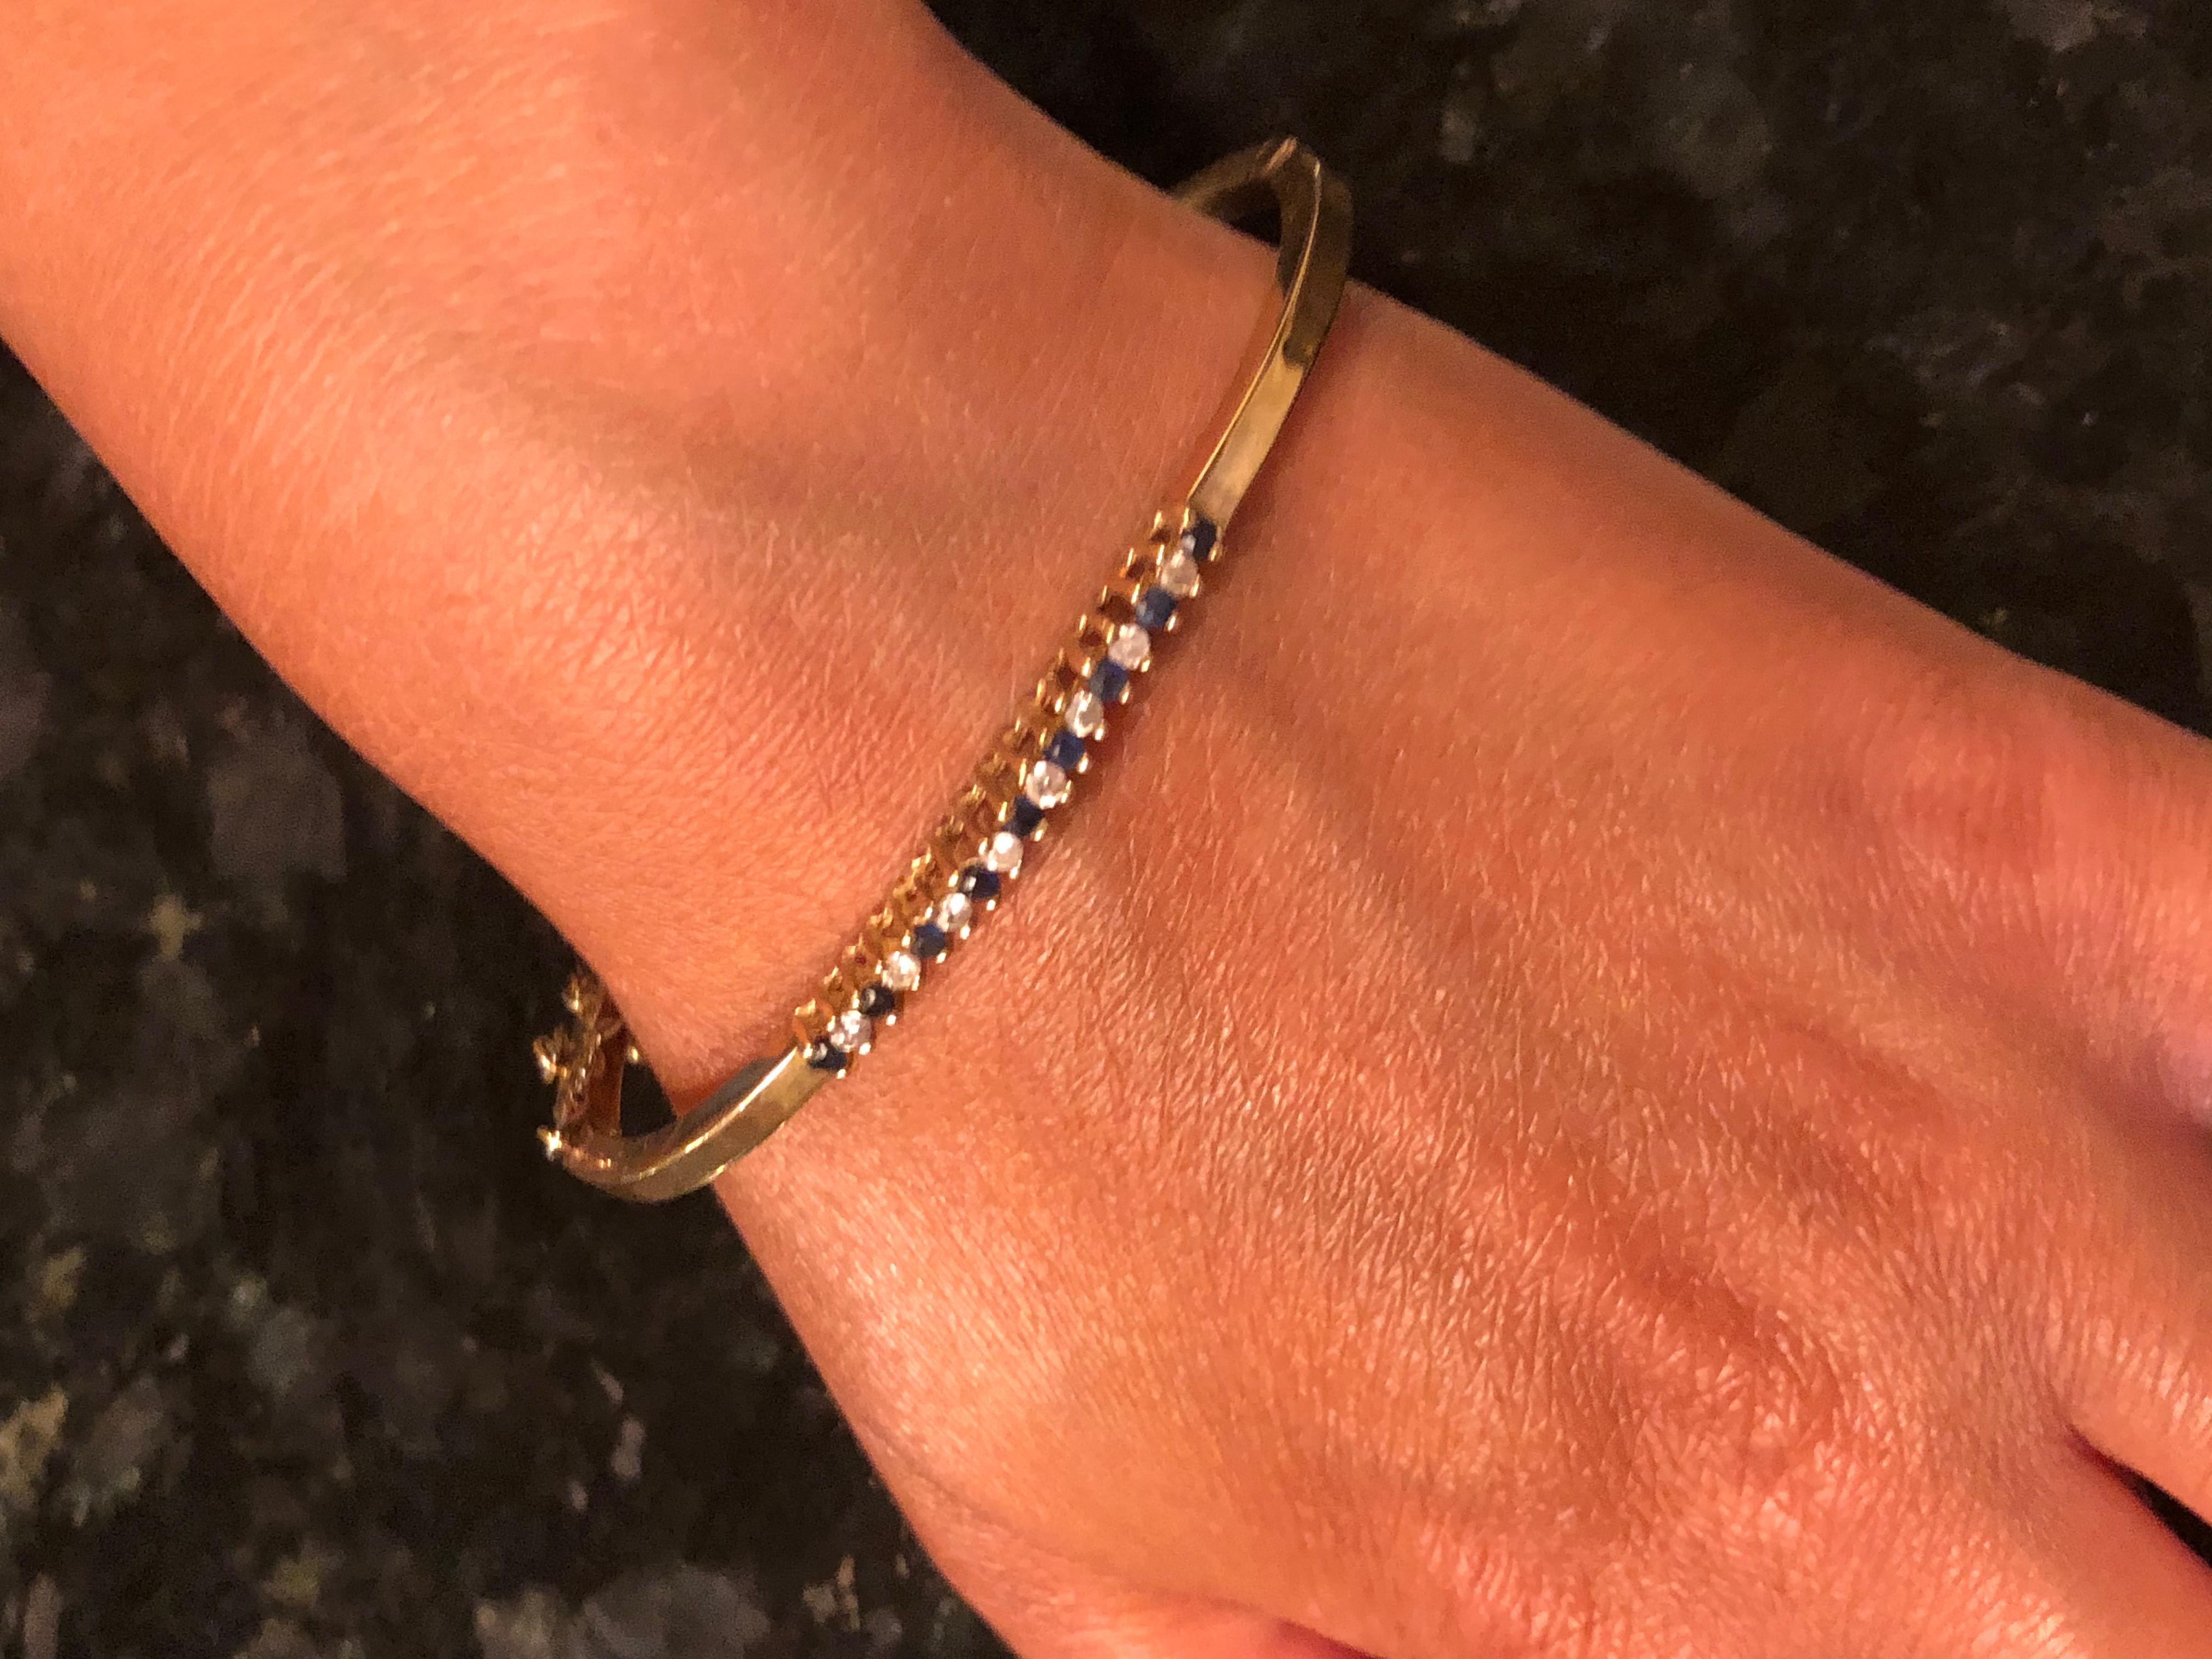 14 Karat Yellow Gold Fashion Bangle with sapphires and Diamonds.
0.25 total diamond weight.
7 grams total weight.
This is a stunning bracket with a quality lock on it. The diameter of the bracelet is 8 inches. 
